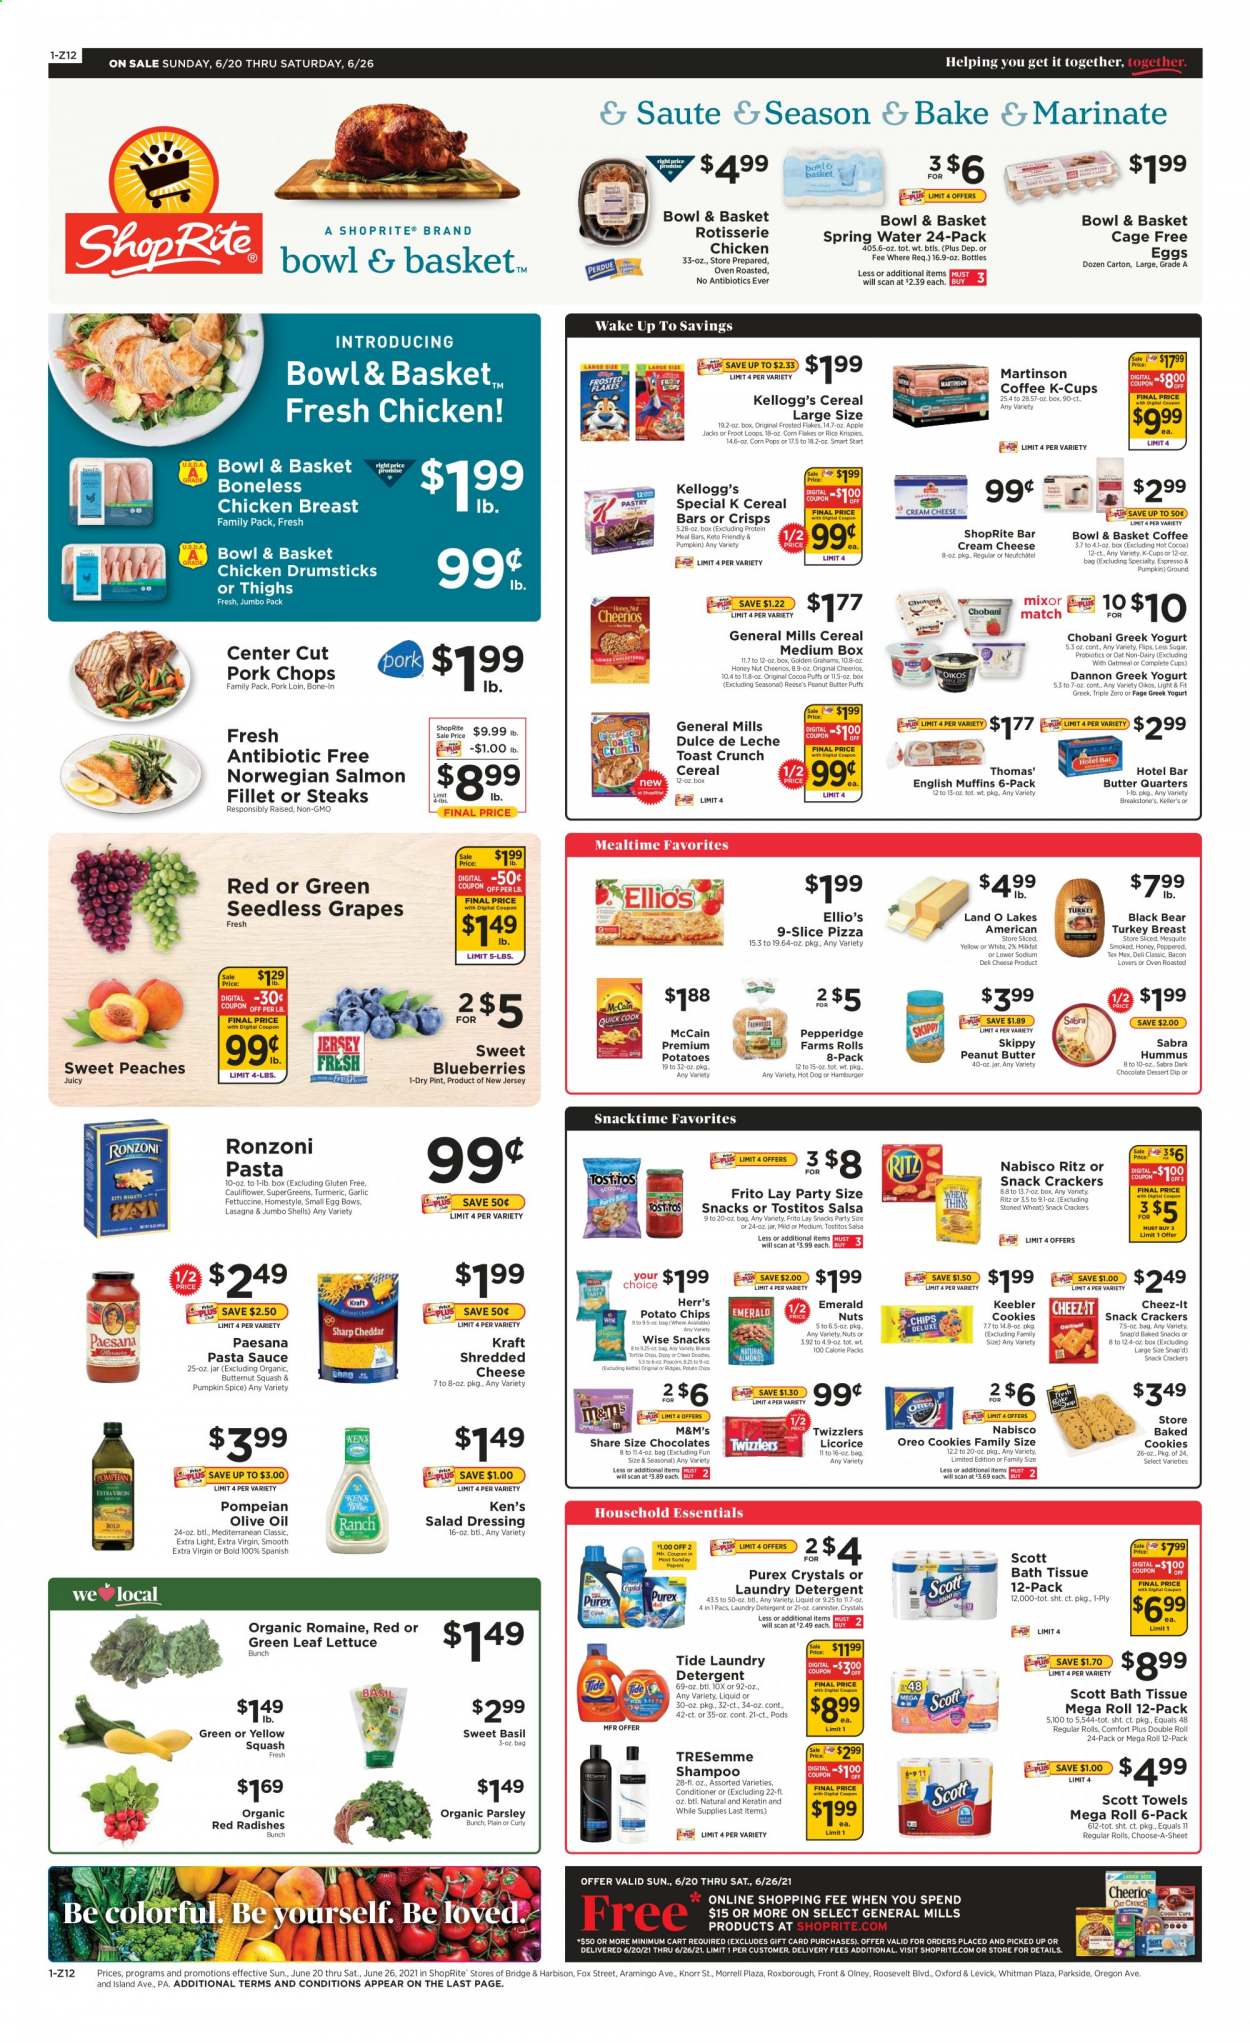 thumbnail - ShopRite Flyer - 06/20/2021 - 06/26/2021 - Sales products - seedless grapes, Bowl & Basket, garlic, radishes, parsley, lettuce, yellow squash, blueberries, grapes, salmon, salmon fillet, hot dog, pizza, chicken roast, pasta sauce, hamburger, Knorr, sauce, lasagna meal, Kraft®, bacon, hummus, cream cheese, Neufchâtel, shredded cheese, greek yoghurt, Oreo, yoghurt, Oikos, Chobani, Dannon, eggs, cage free eggs, dip, Reese's, McCain, cookies, chocolate, M&M's, cereal bar, crackers, Kellogg's, dark chocolate, Keebler, RITZ, tortilla chips, potato chips, chips, Snacktime, popcorn, Cheez-It, Tostitos, oatmeal, cereals, Cheerios, corn flakes, Rice Krispies, Frosted Flakes, Corn Pops, esponja, turmeric, spice, salad dressing, dressing, salsa, extra virgin olive oil, olive oil, oil, peanut butter, spring water, hot cocoa, coffee capsules, K-Cups, turkey breast, chicken breasts, chicken drumsticks, steak, pork chops, pork loin, pork meat, bath tissue, detergent, Tide, laundry detergent, Purex, shampoo, conditioner, TRESemmé, keratin, Scott, probiotics, butternut squash, peaches. Page 1.